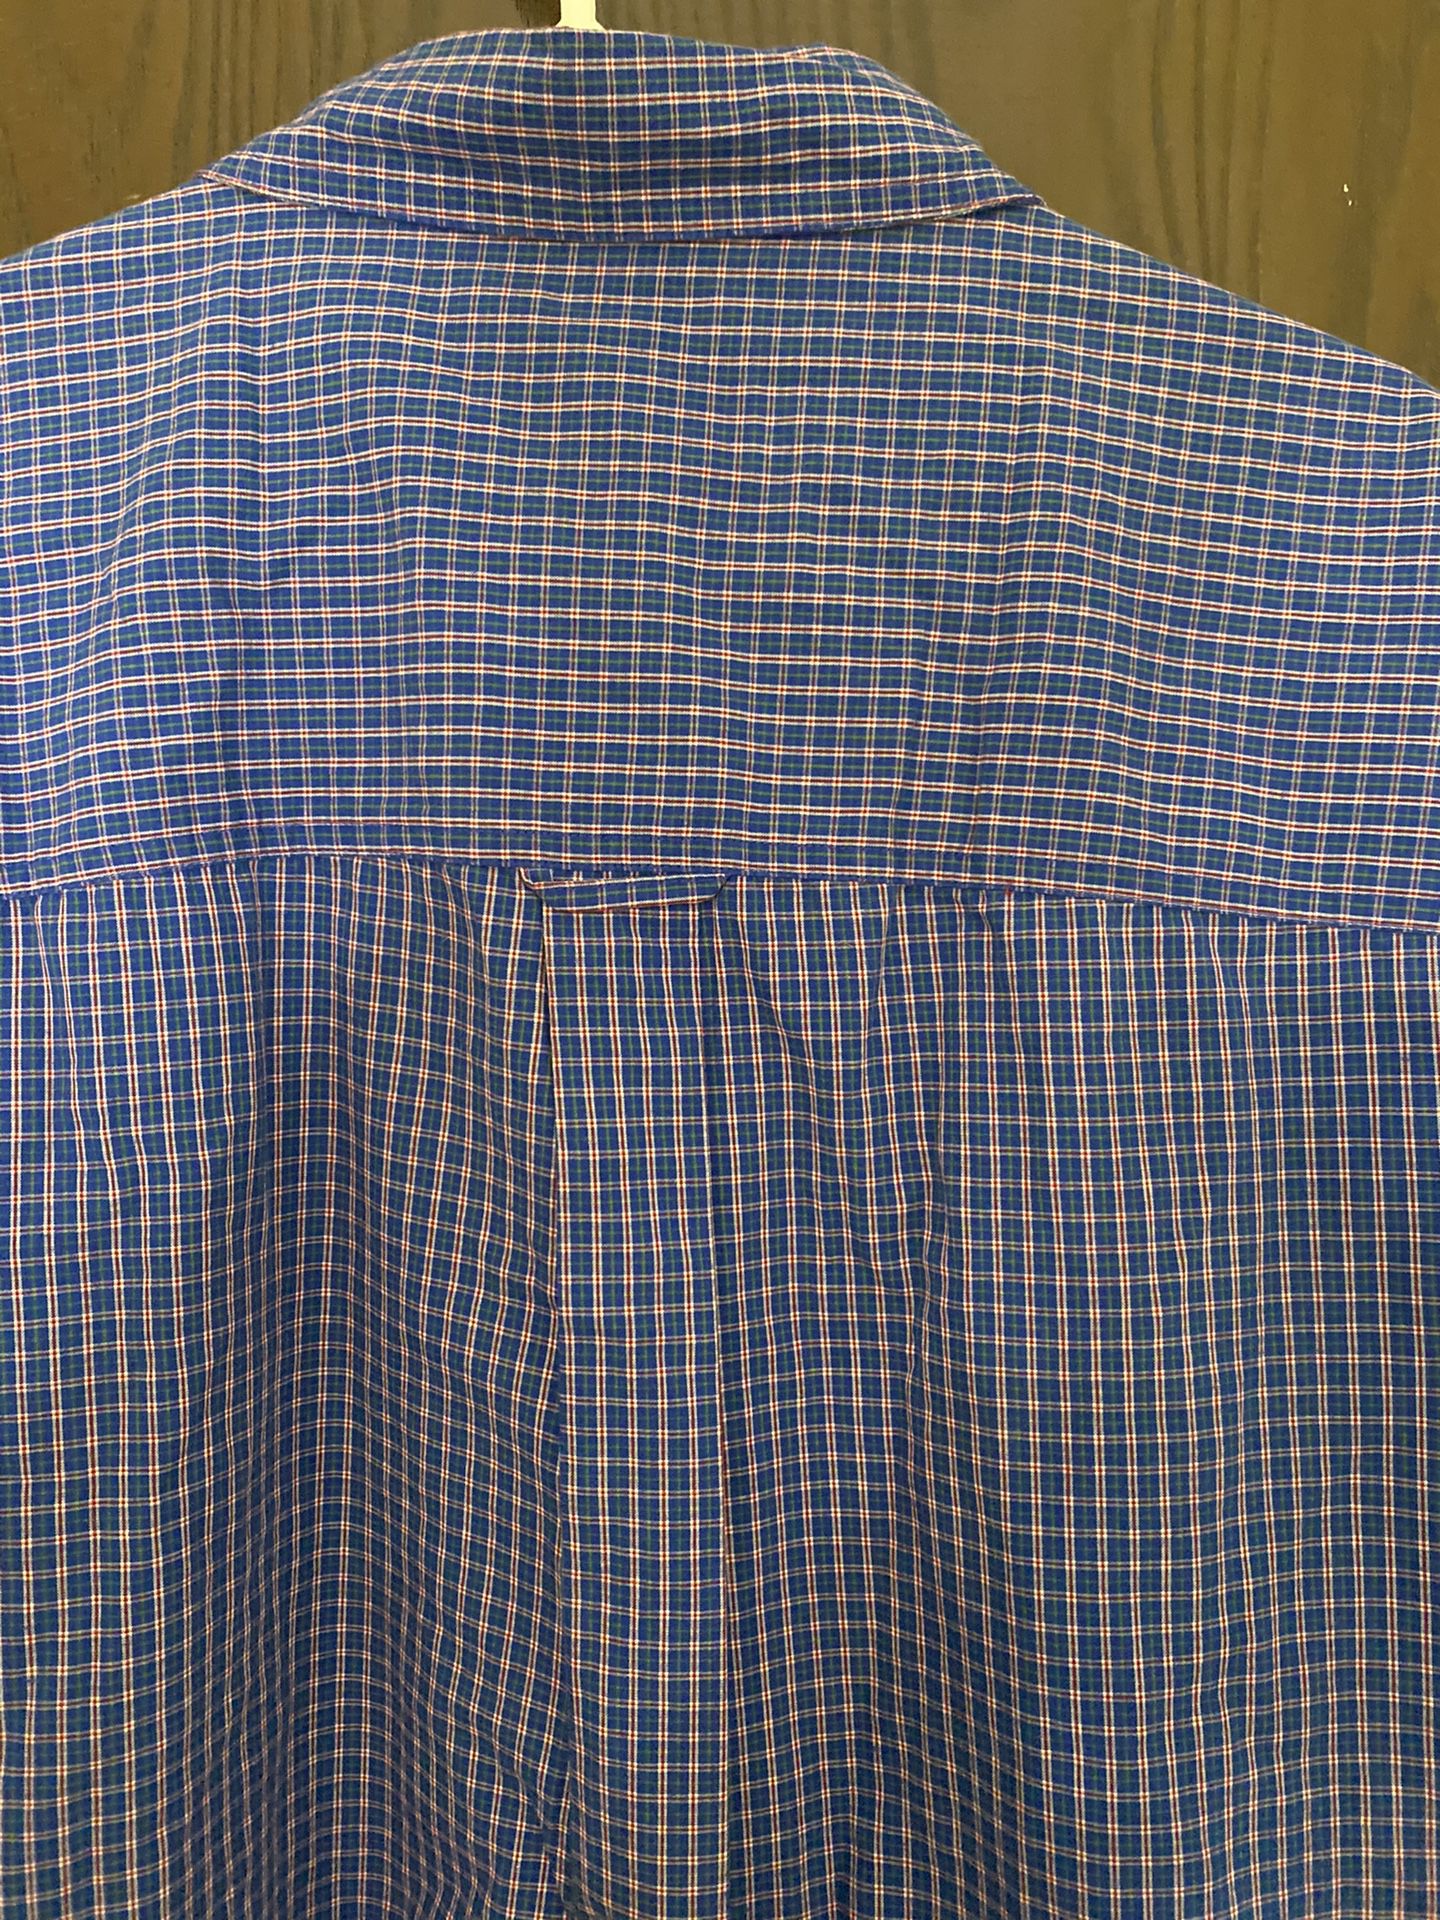 Chaps Easy Care Checkered Long Sleeve Blue Button Down Men's Size XL XLarge